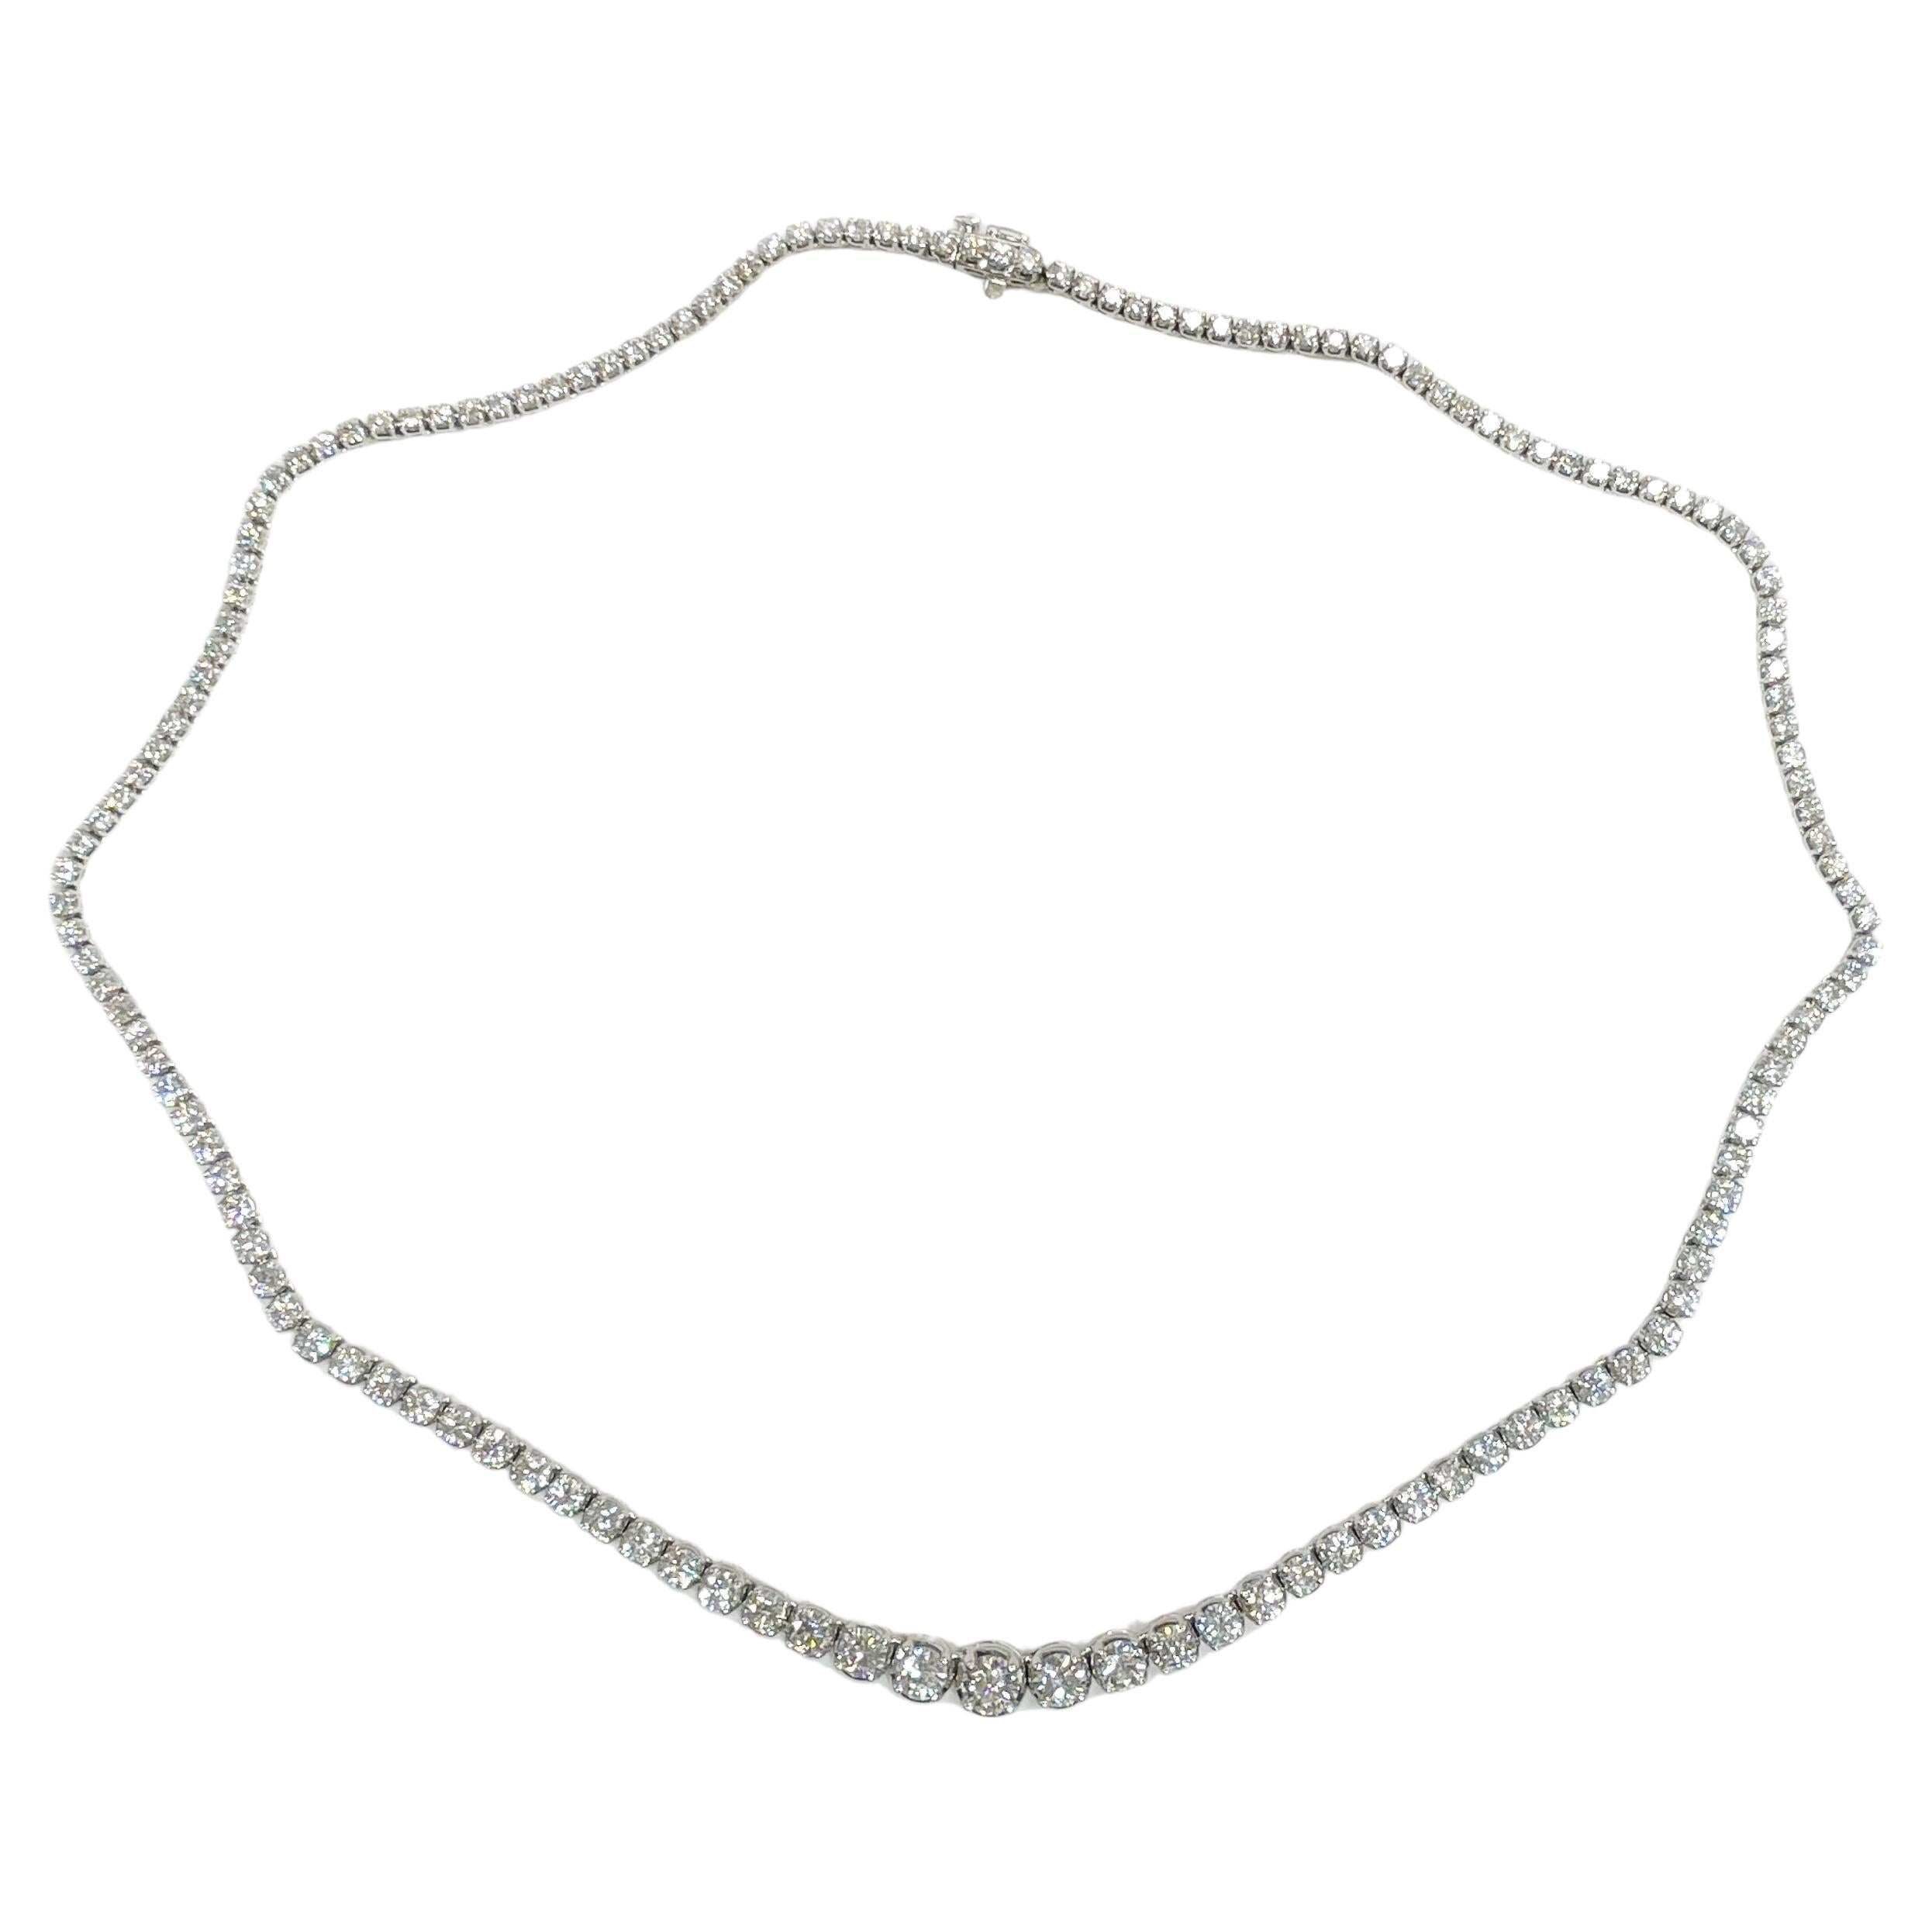 White Gold Diamond Eternity Necklace, 11.75 Carats For Sale